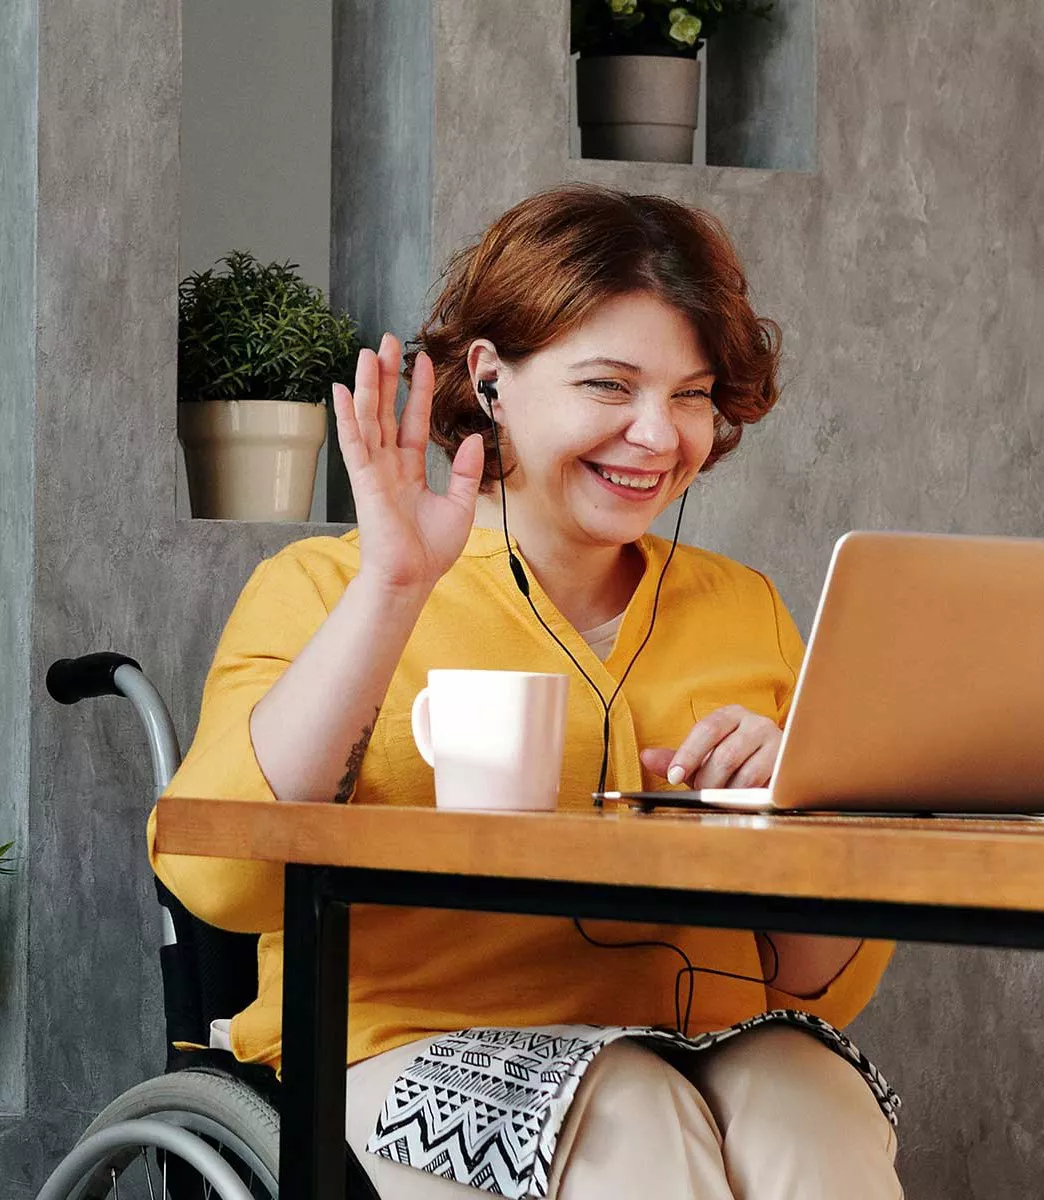 Woman working on laptop waving with headphones